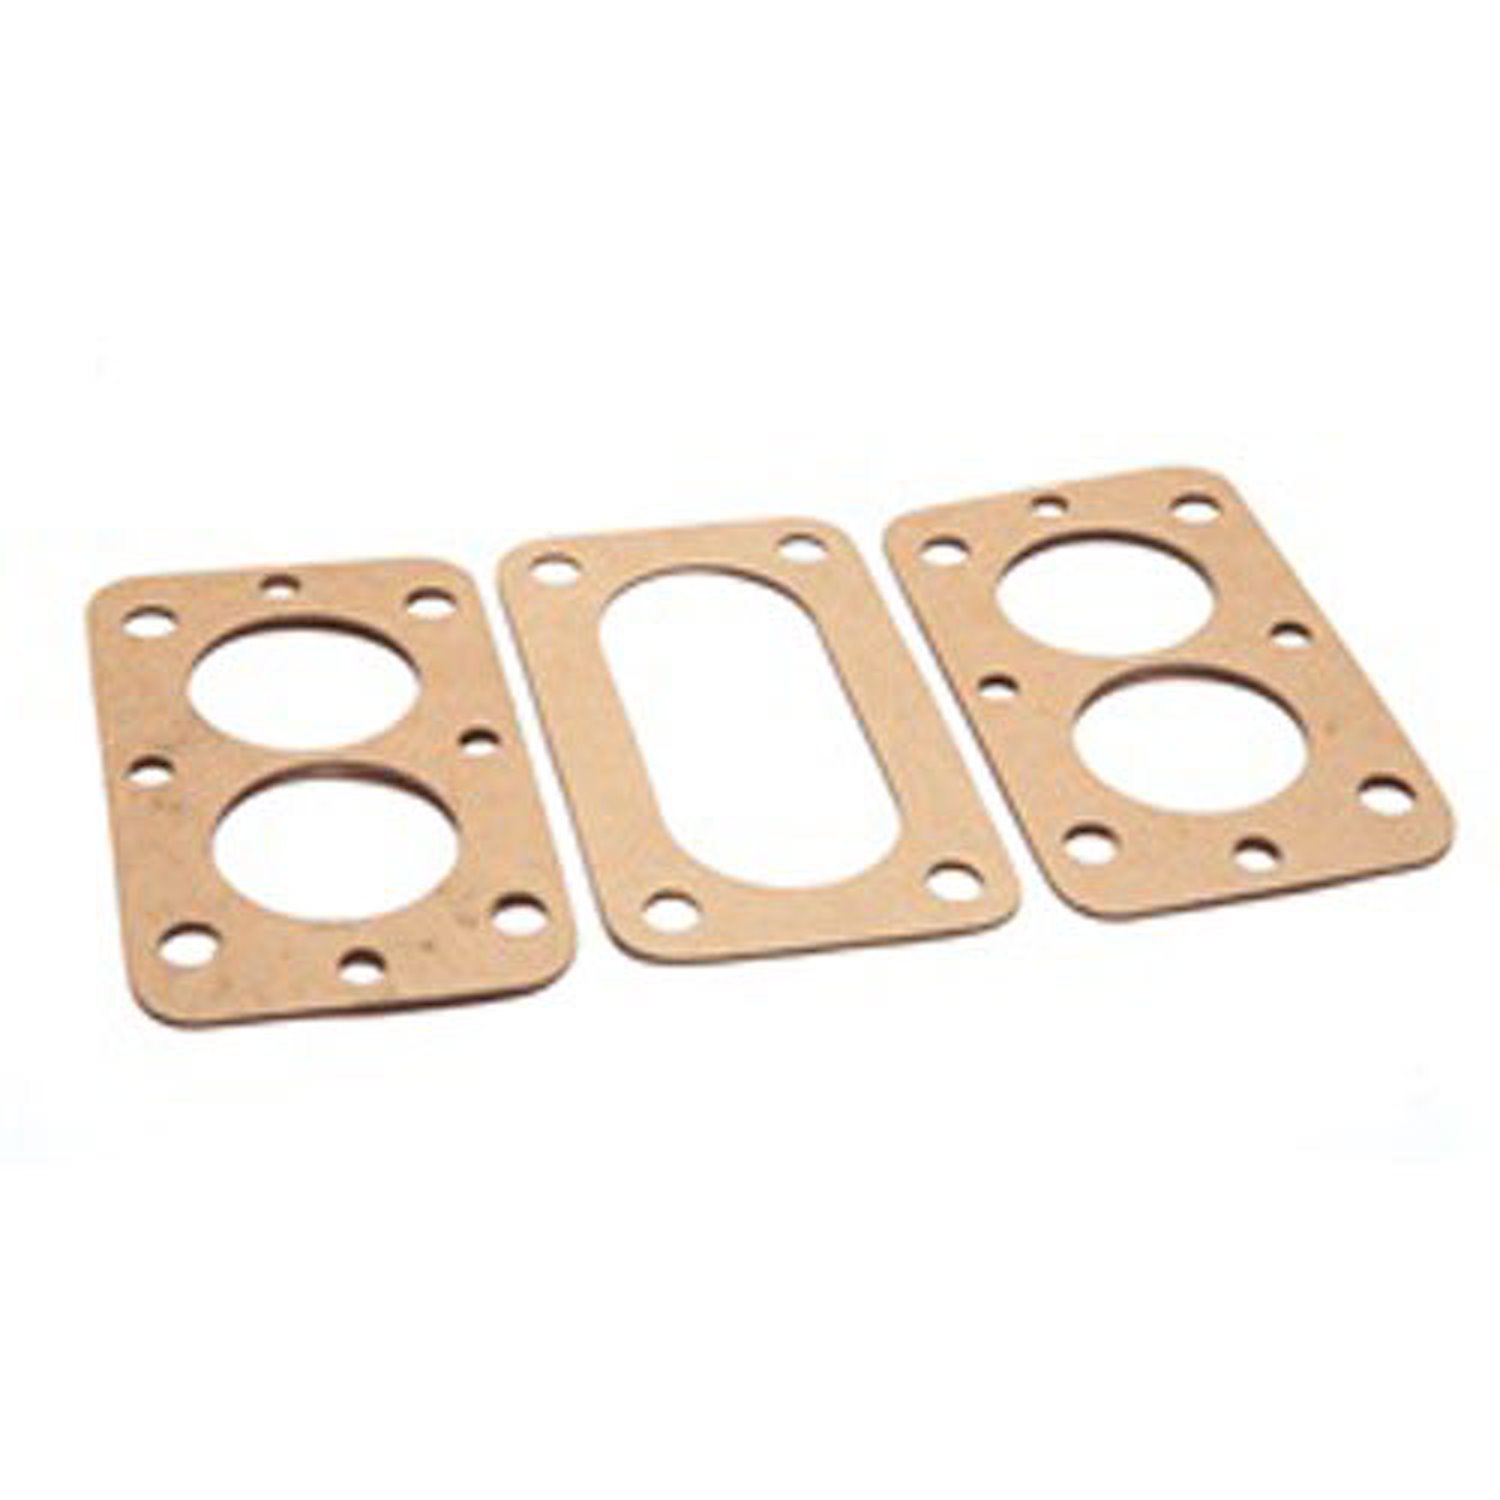 This carburetor adapter gasket fits the Weber K551 carb for 4.2L engines found in 72-83 Jeep CJ-5s 7